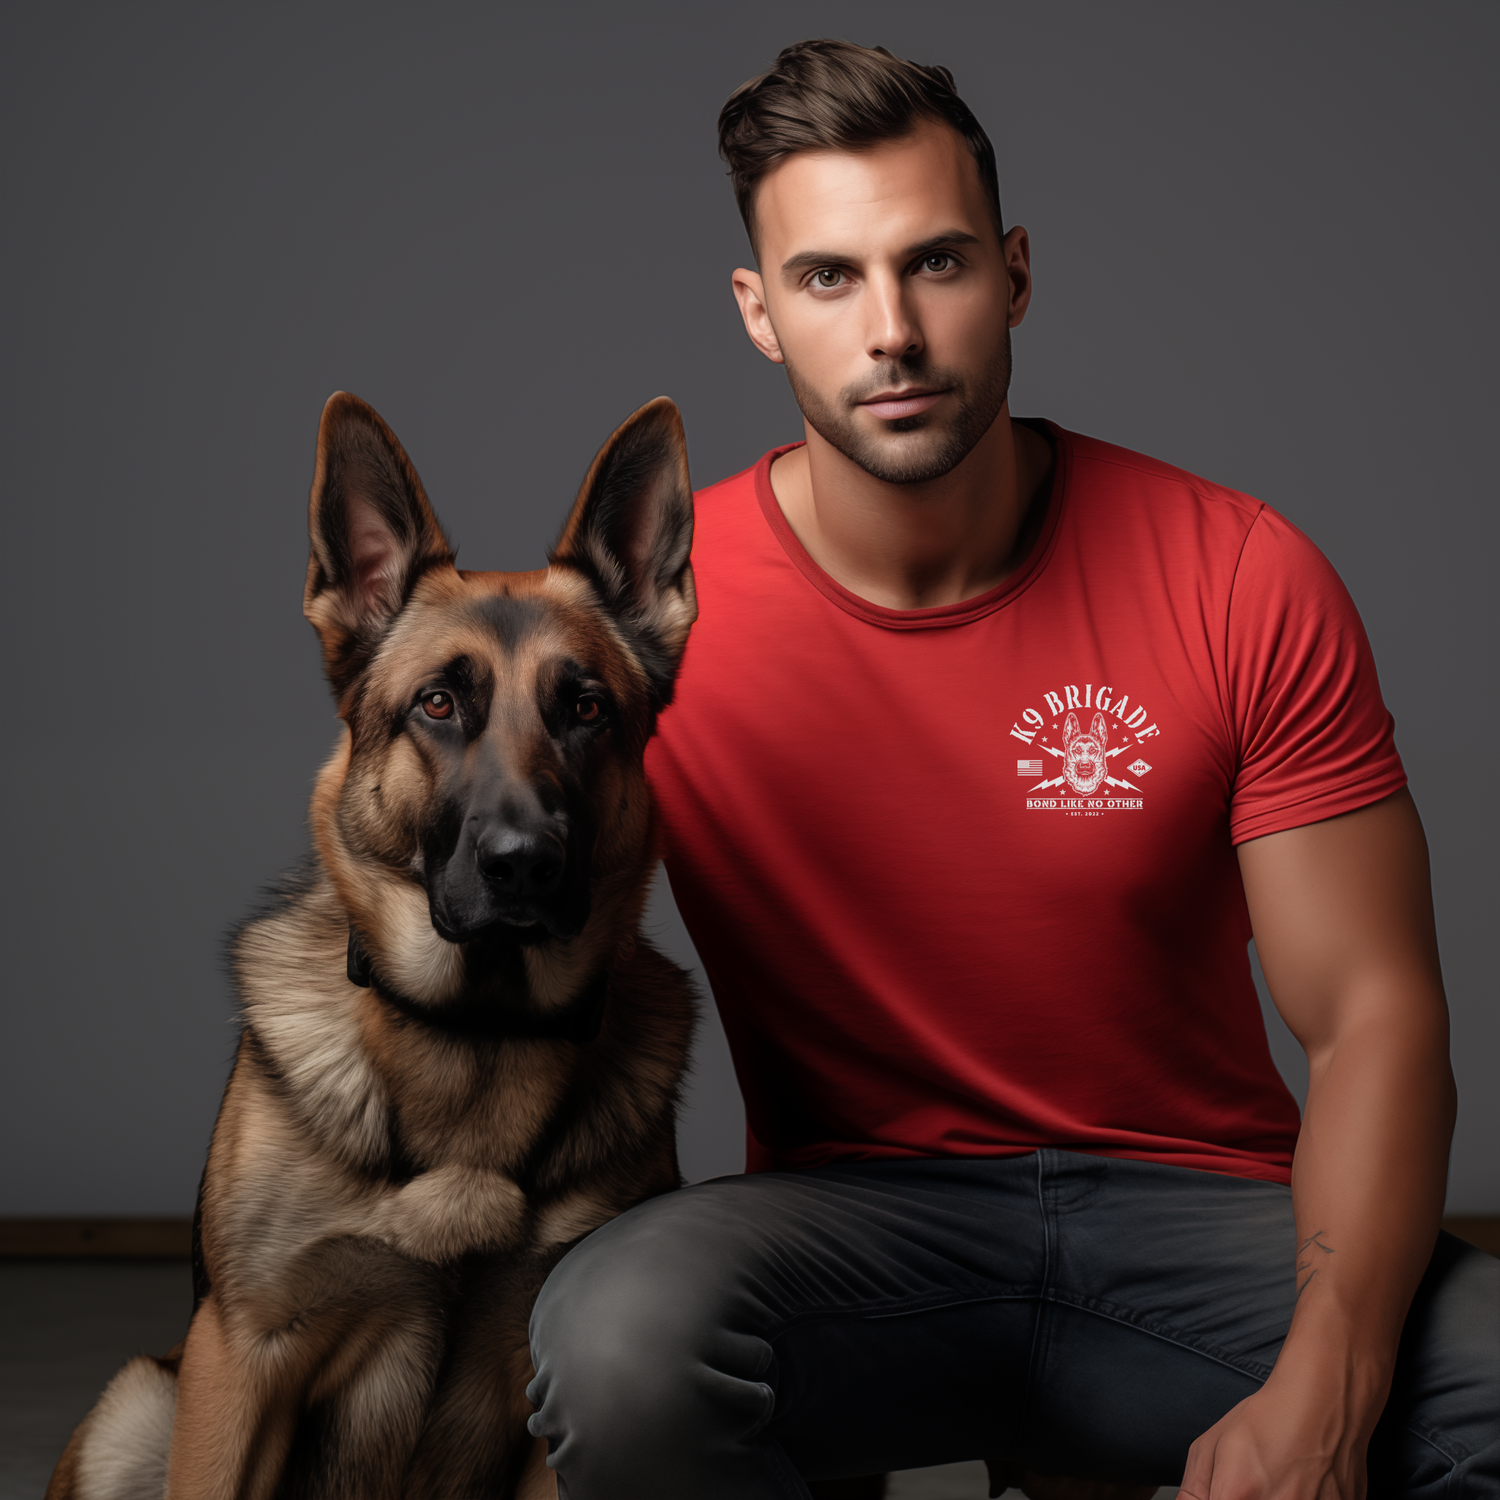 Style Meets Service: Elevate Your K9 Connection with K9 Brigade